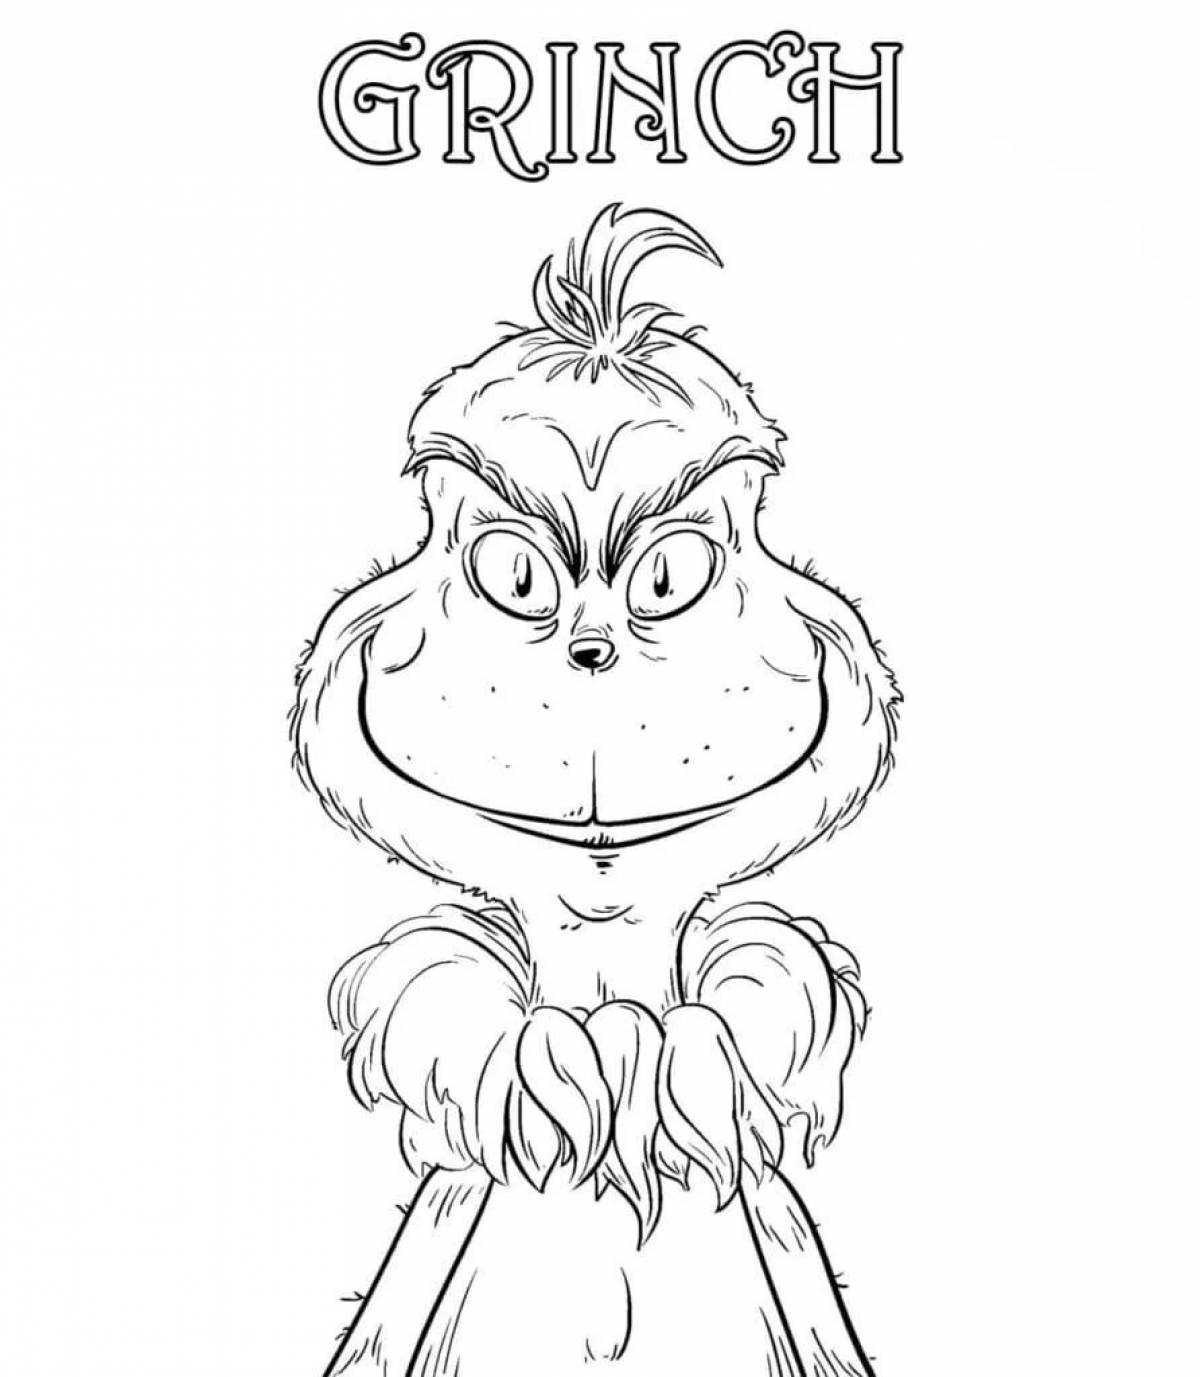 Grinch drawing #6